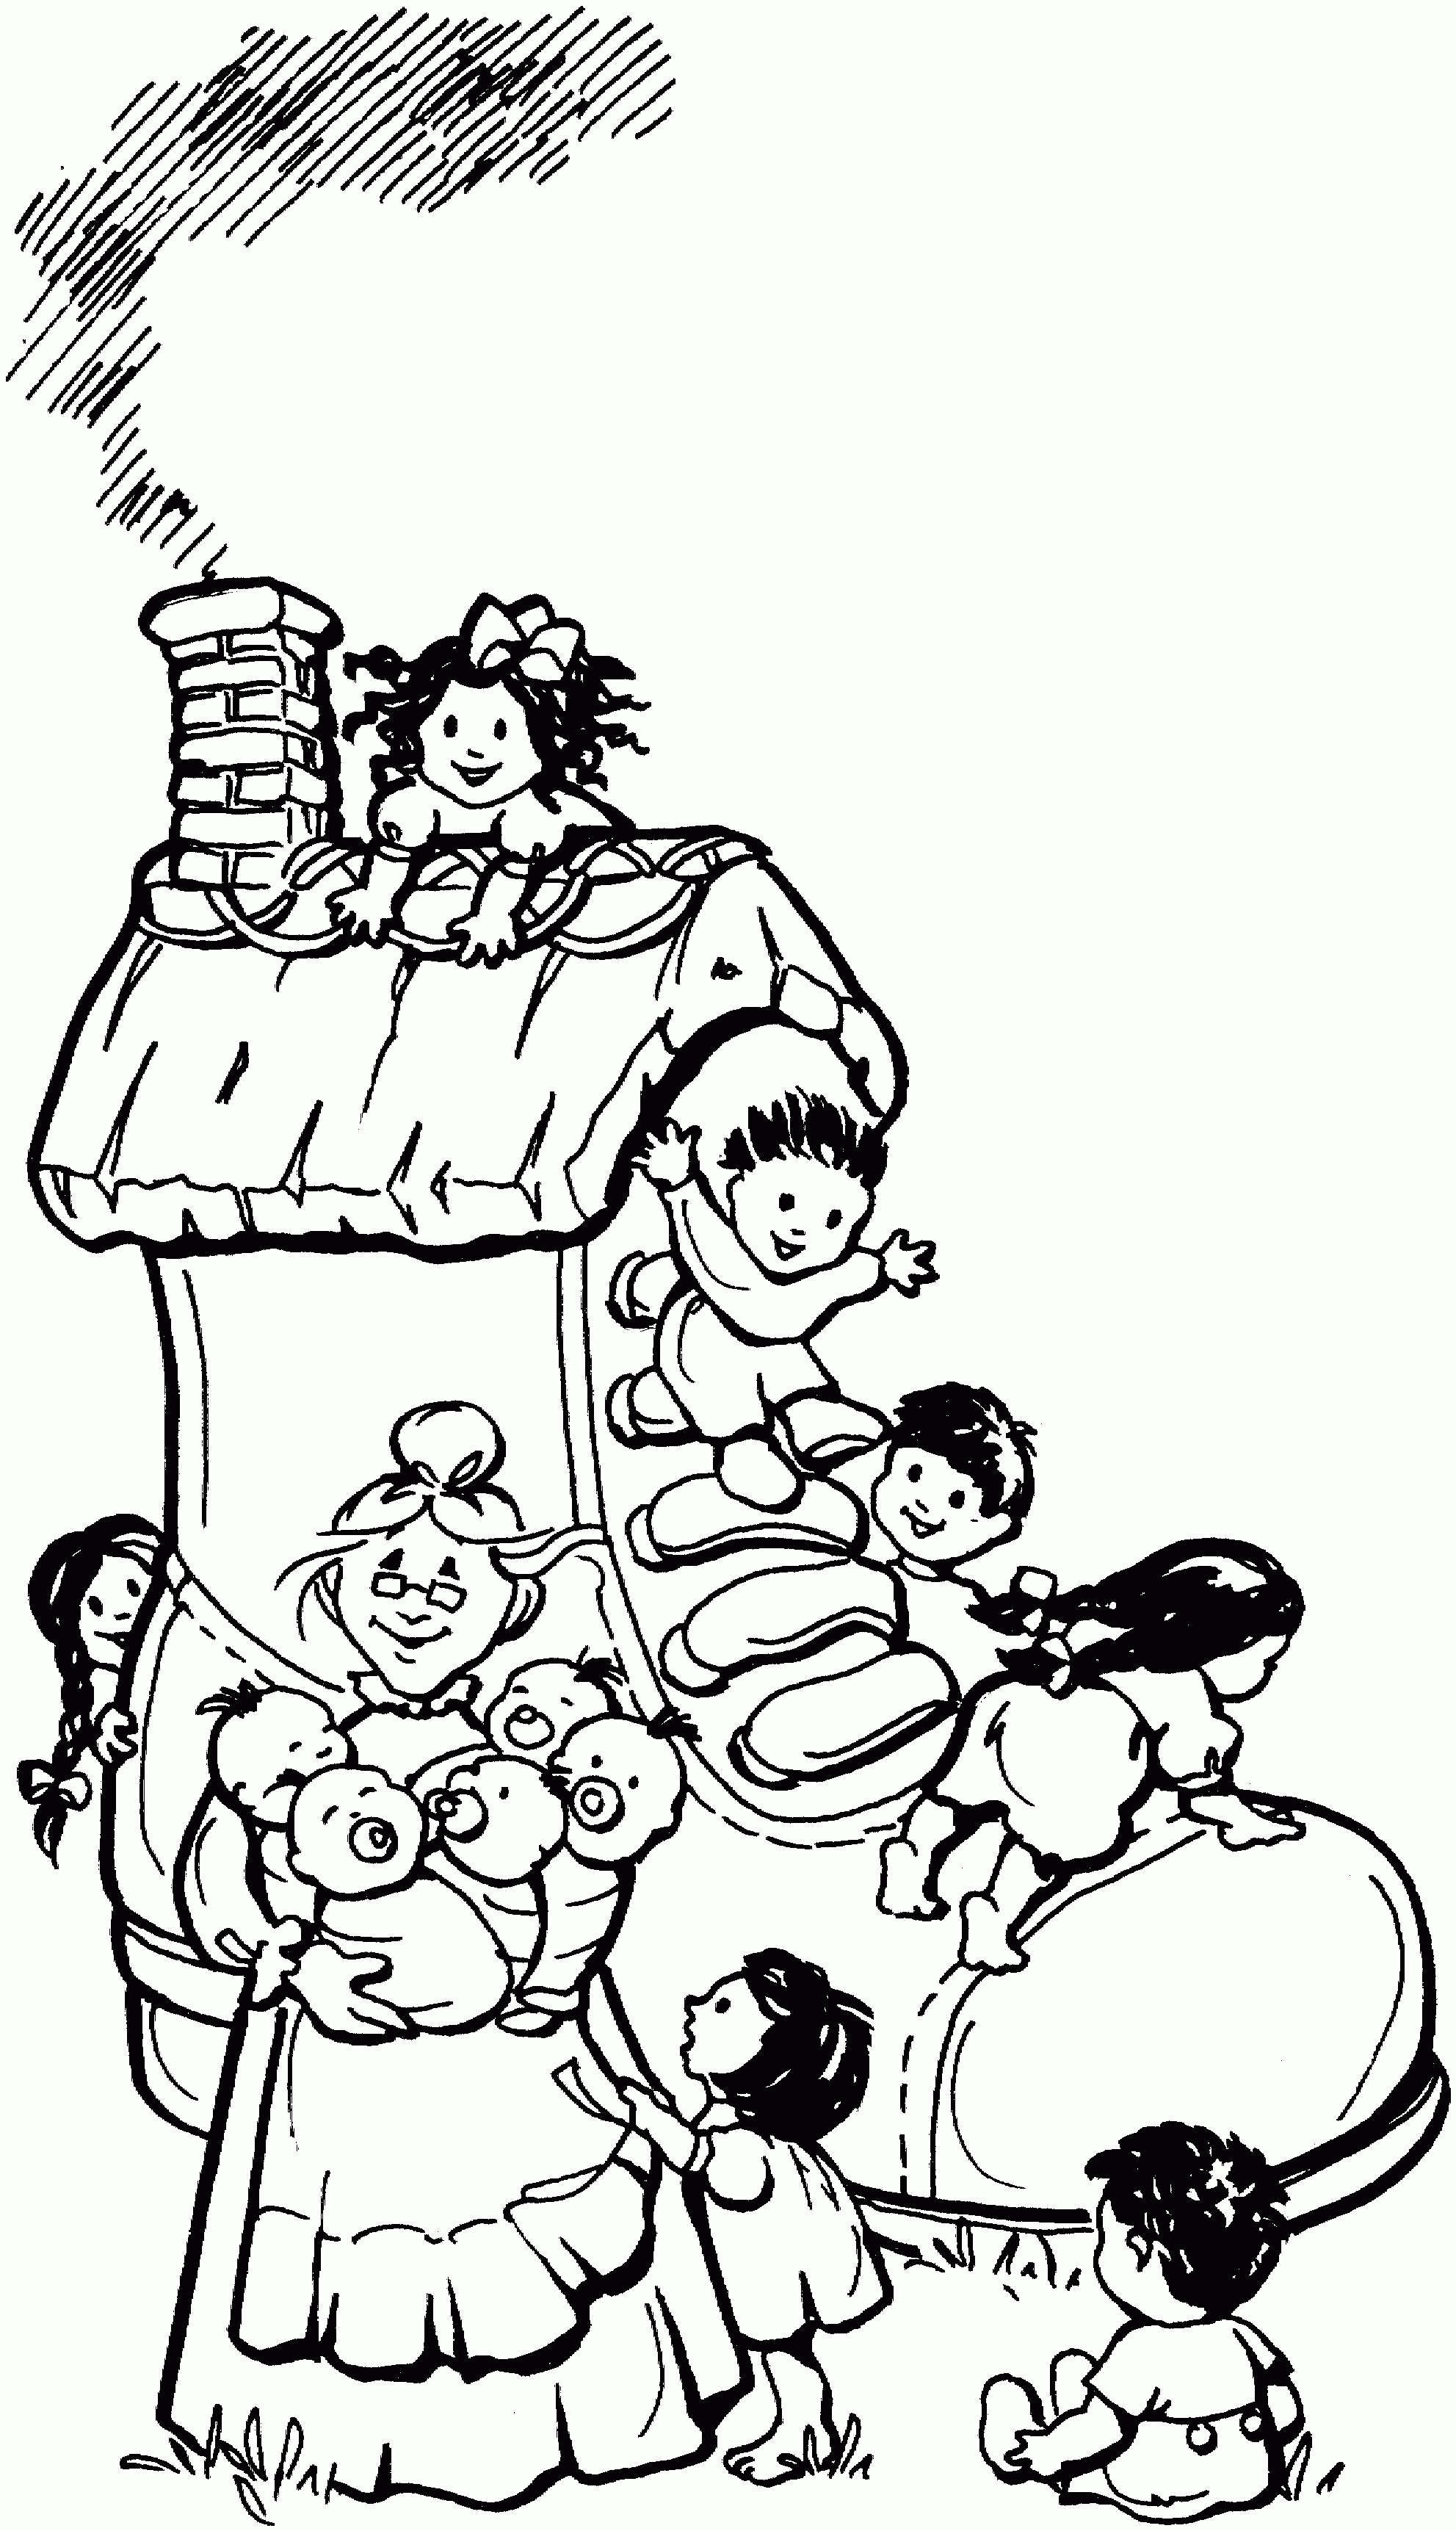 Nursery-Rhymes-Coloring-Pages-To-Print.gif (1983×3446) | Craft Ideas - Mother Goose Coloring Pages Free Printable